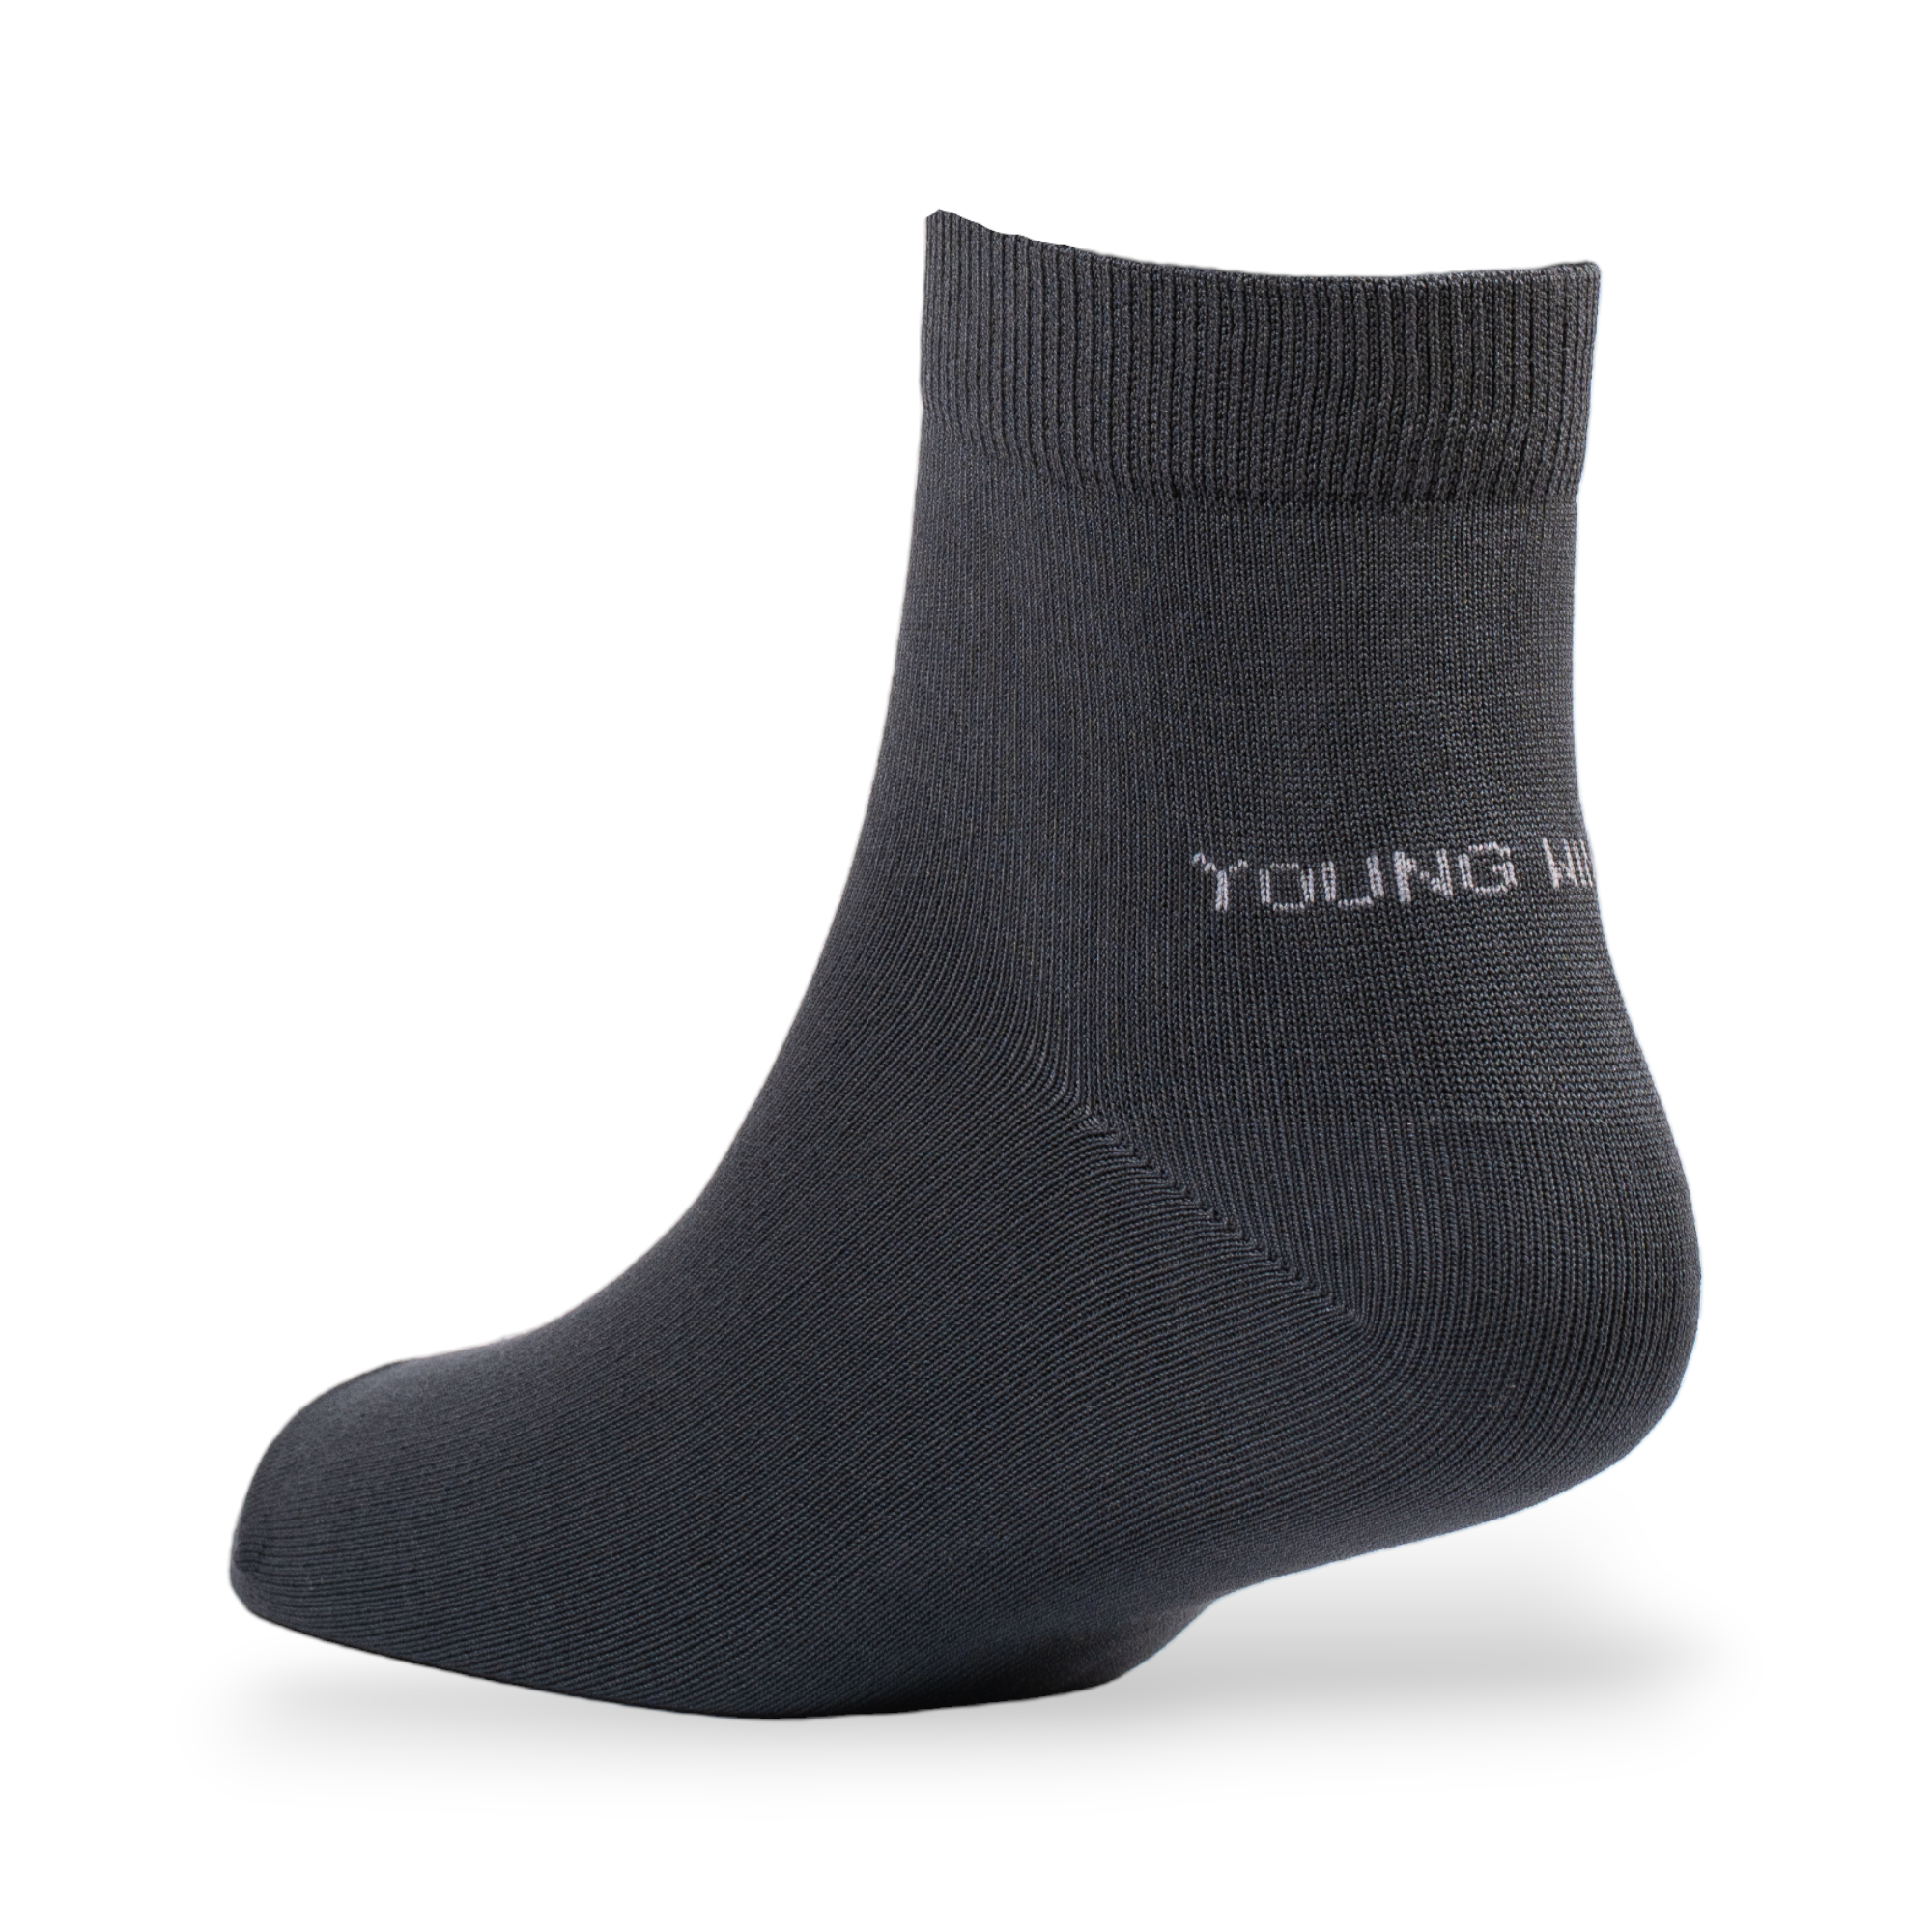 Young Wings Men's Multi Colour Cotton Fabric Solid Ankle Length Socks - Pack of 5, Style no. M1-295-001 N